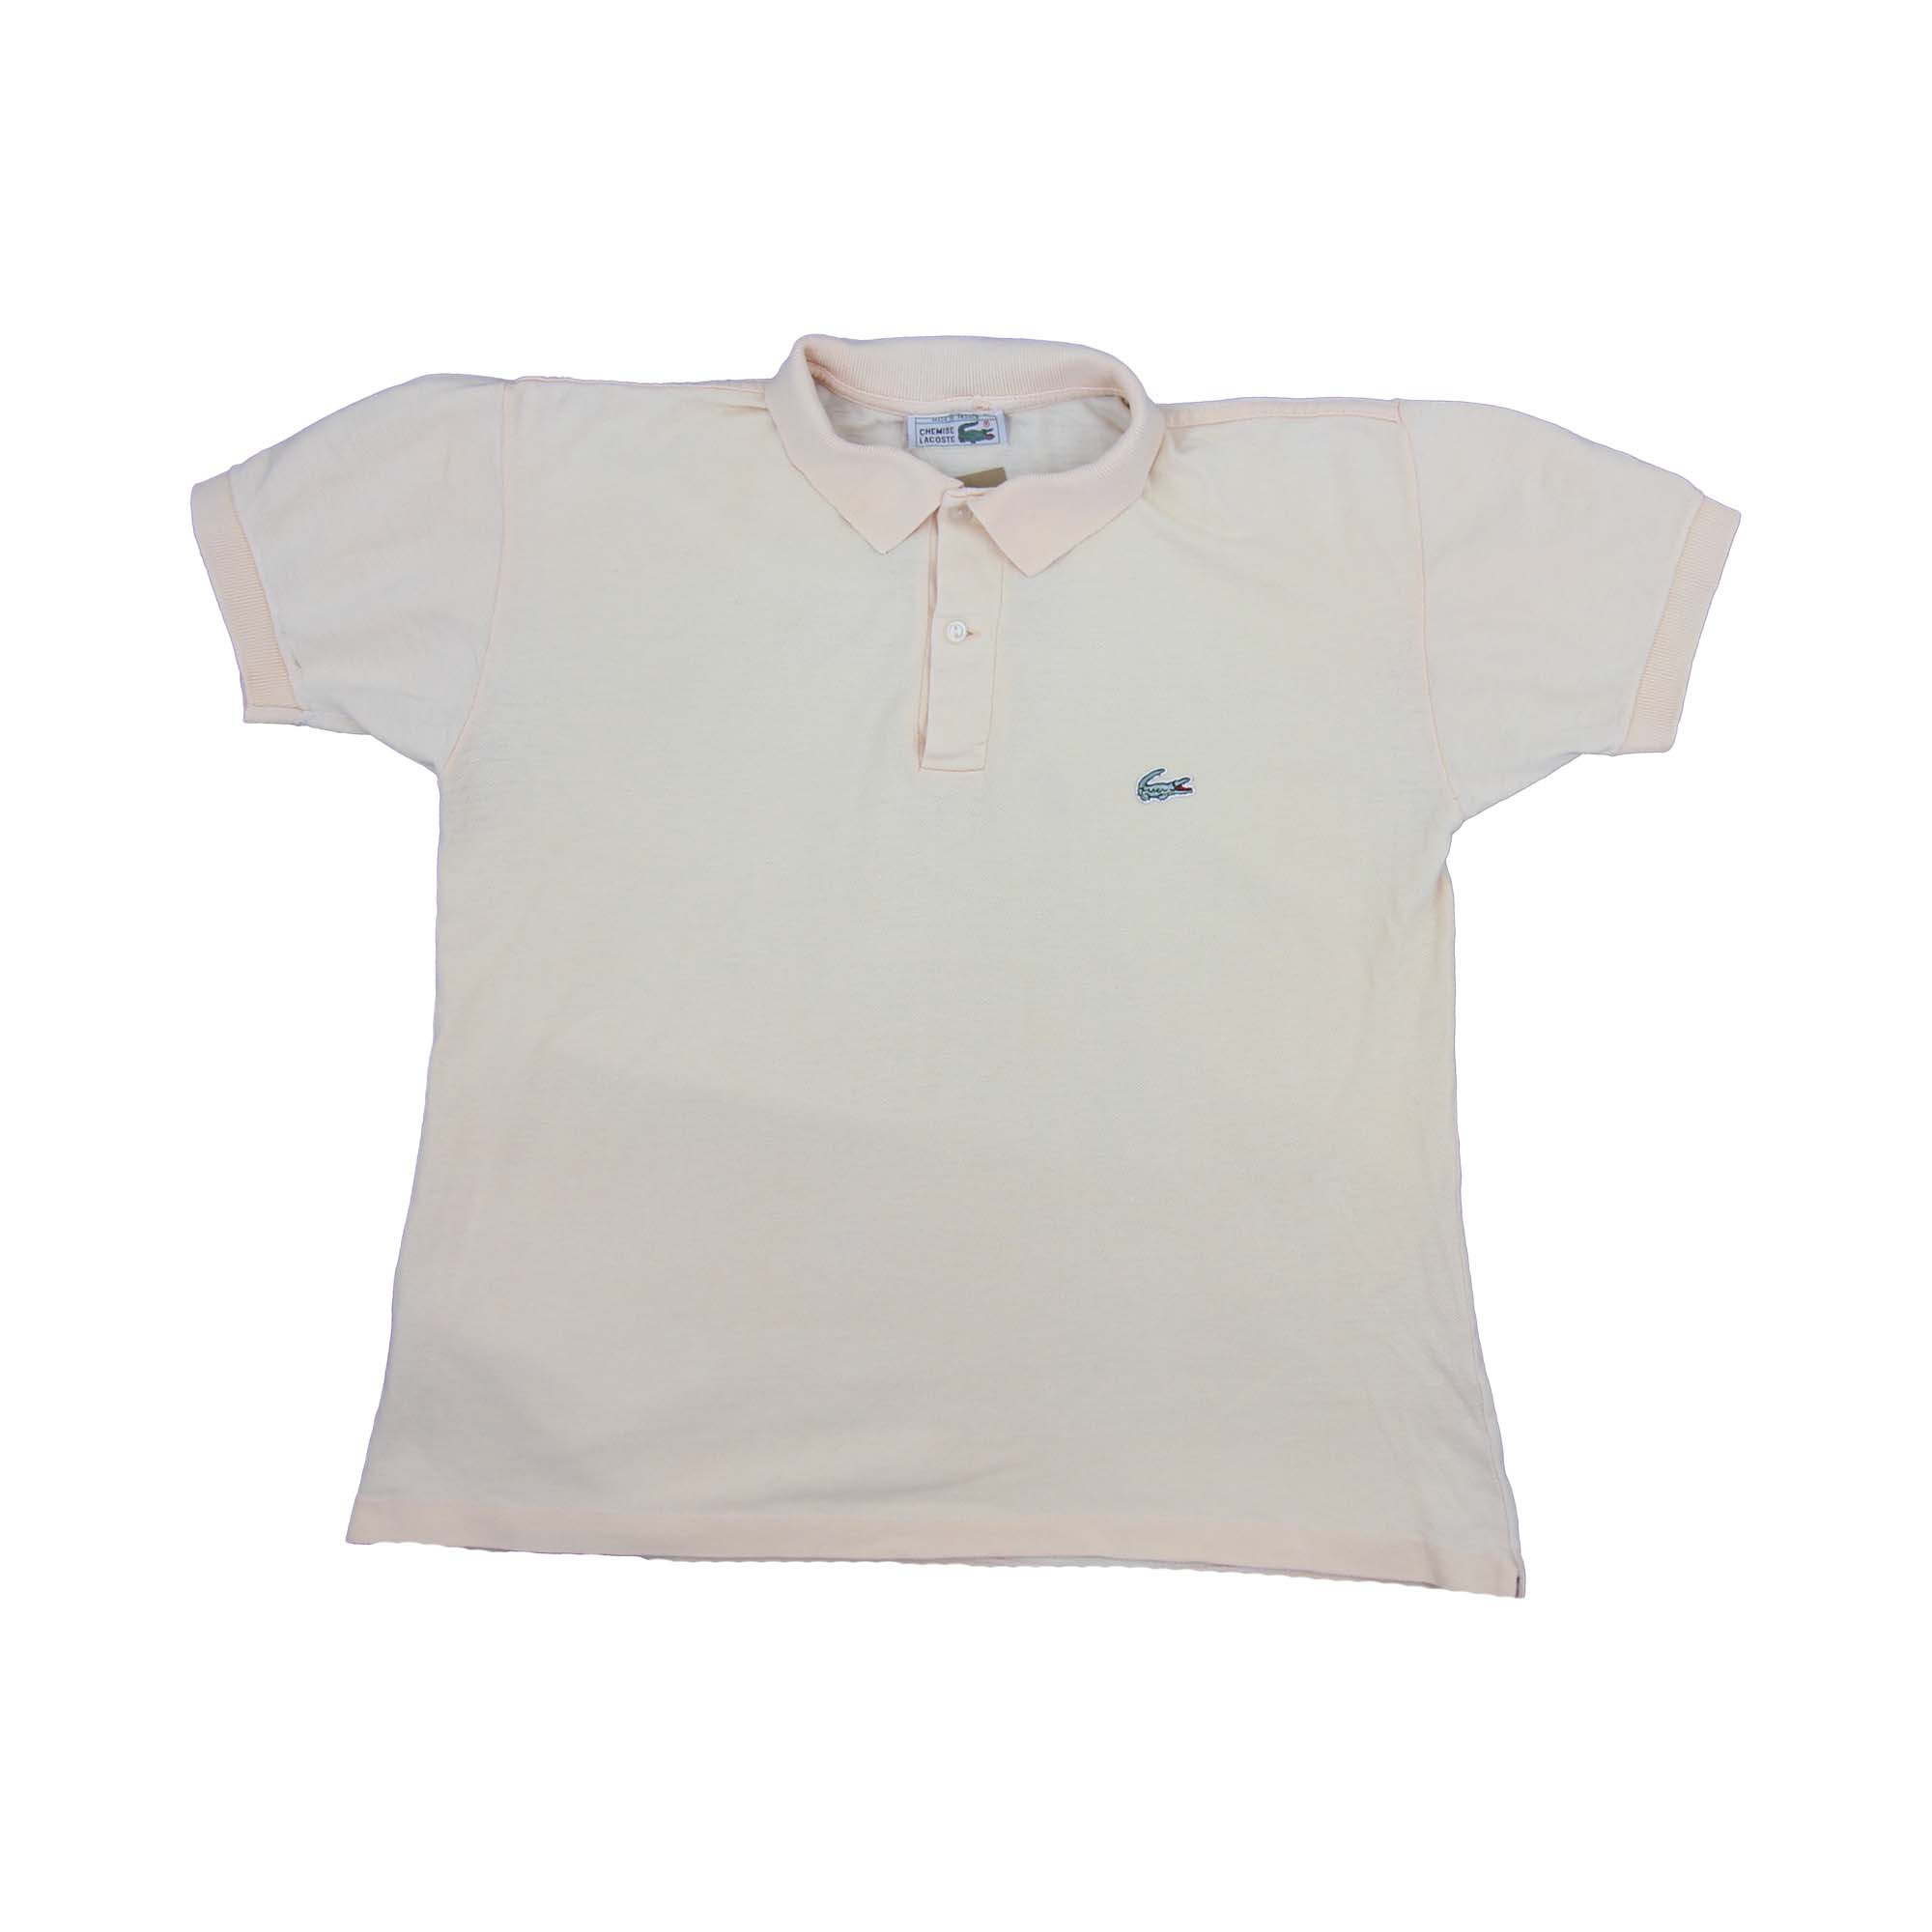 Lacoste Embroidered Logo Polo Shirt - S